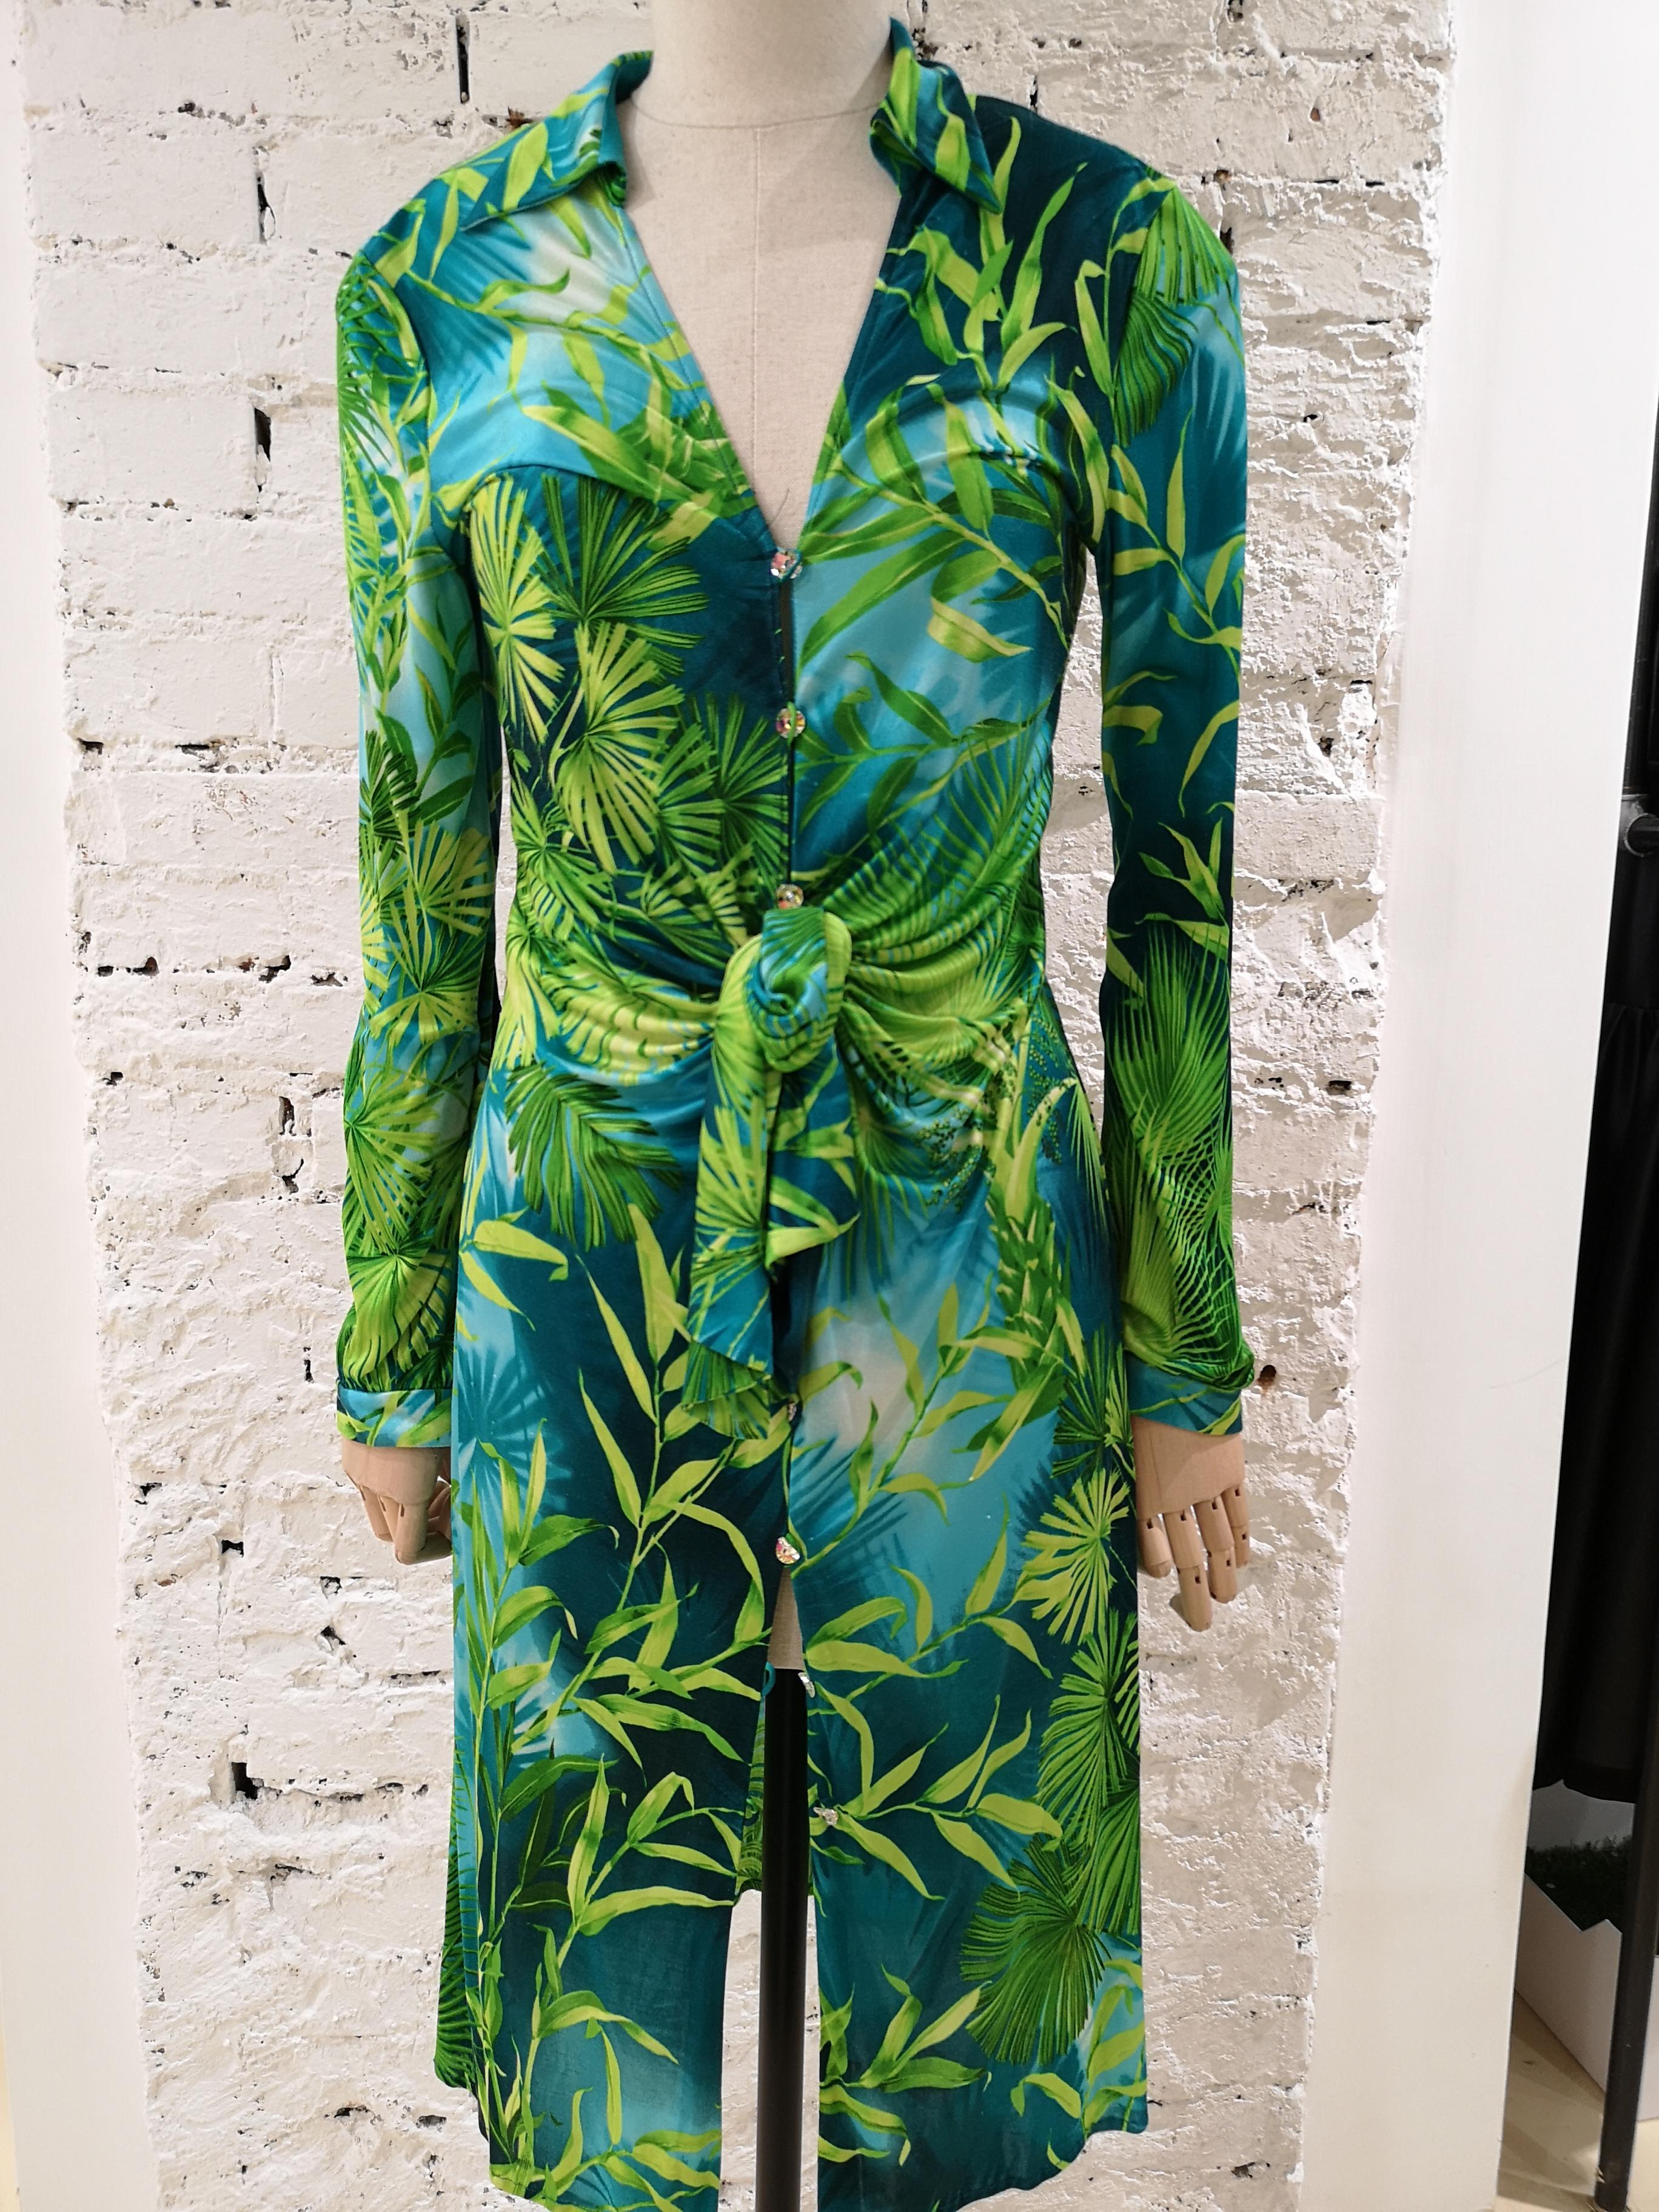 The dress everyone is looking for it's here, the Versace Jungle Dress for J. Lo.

Totally made in italy, floreal jungle print, crystal swarovski buttons on the front, can literally be worn totally open, bow on the front in 100 % silk
Size 42